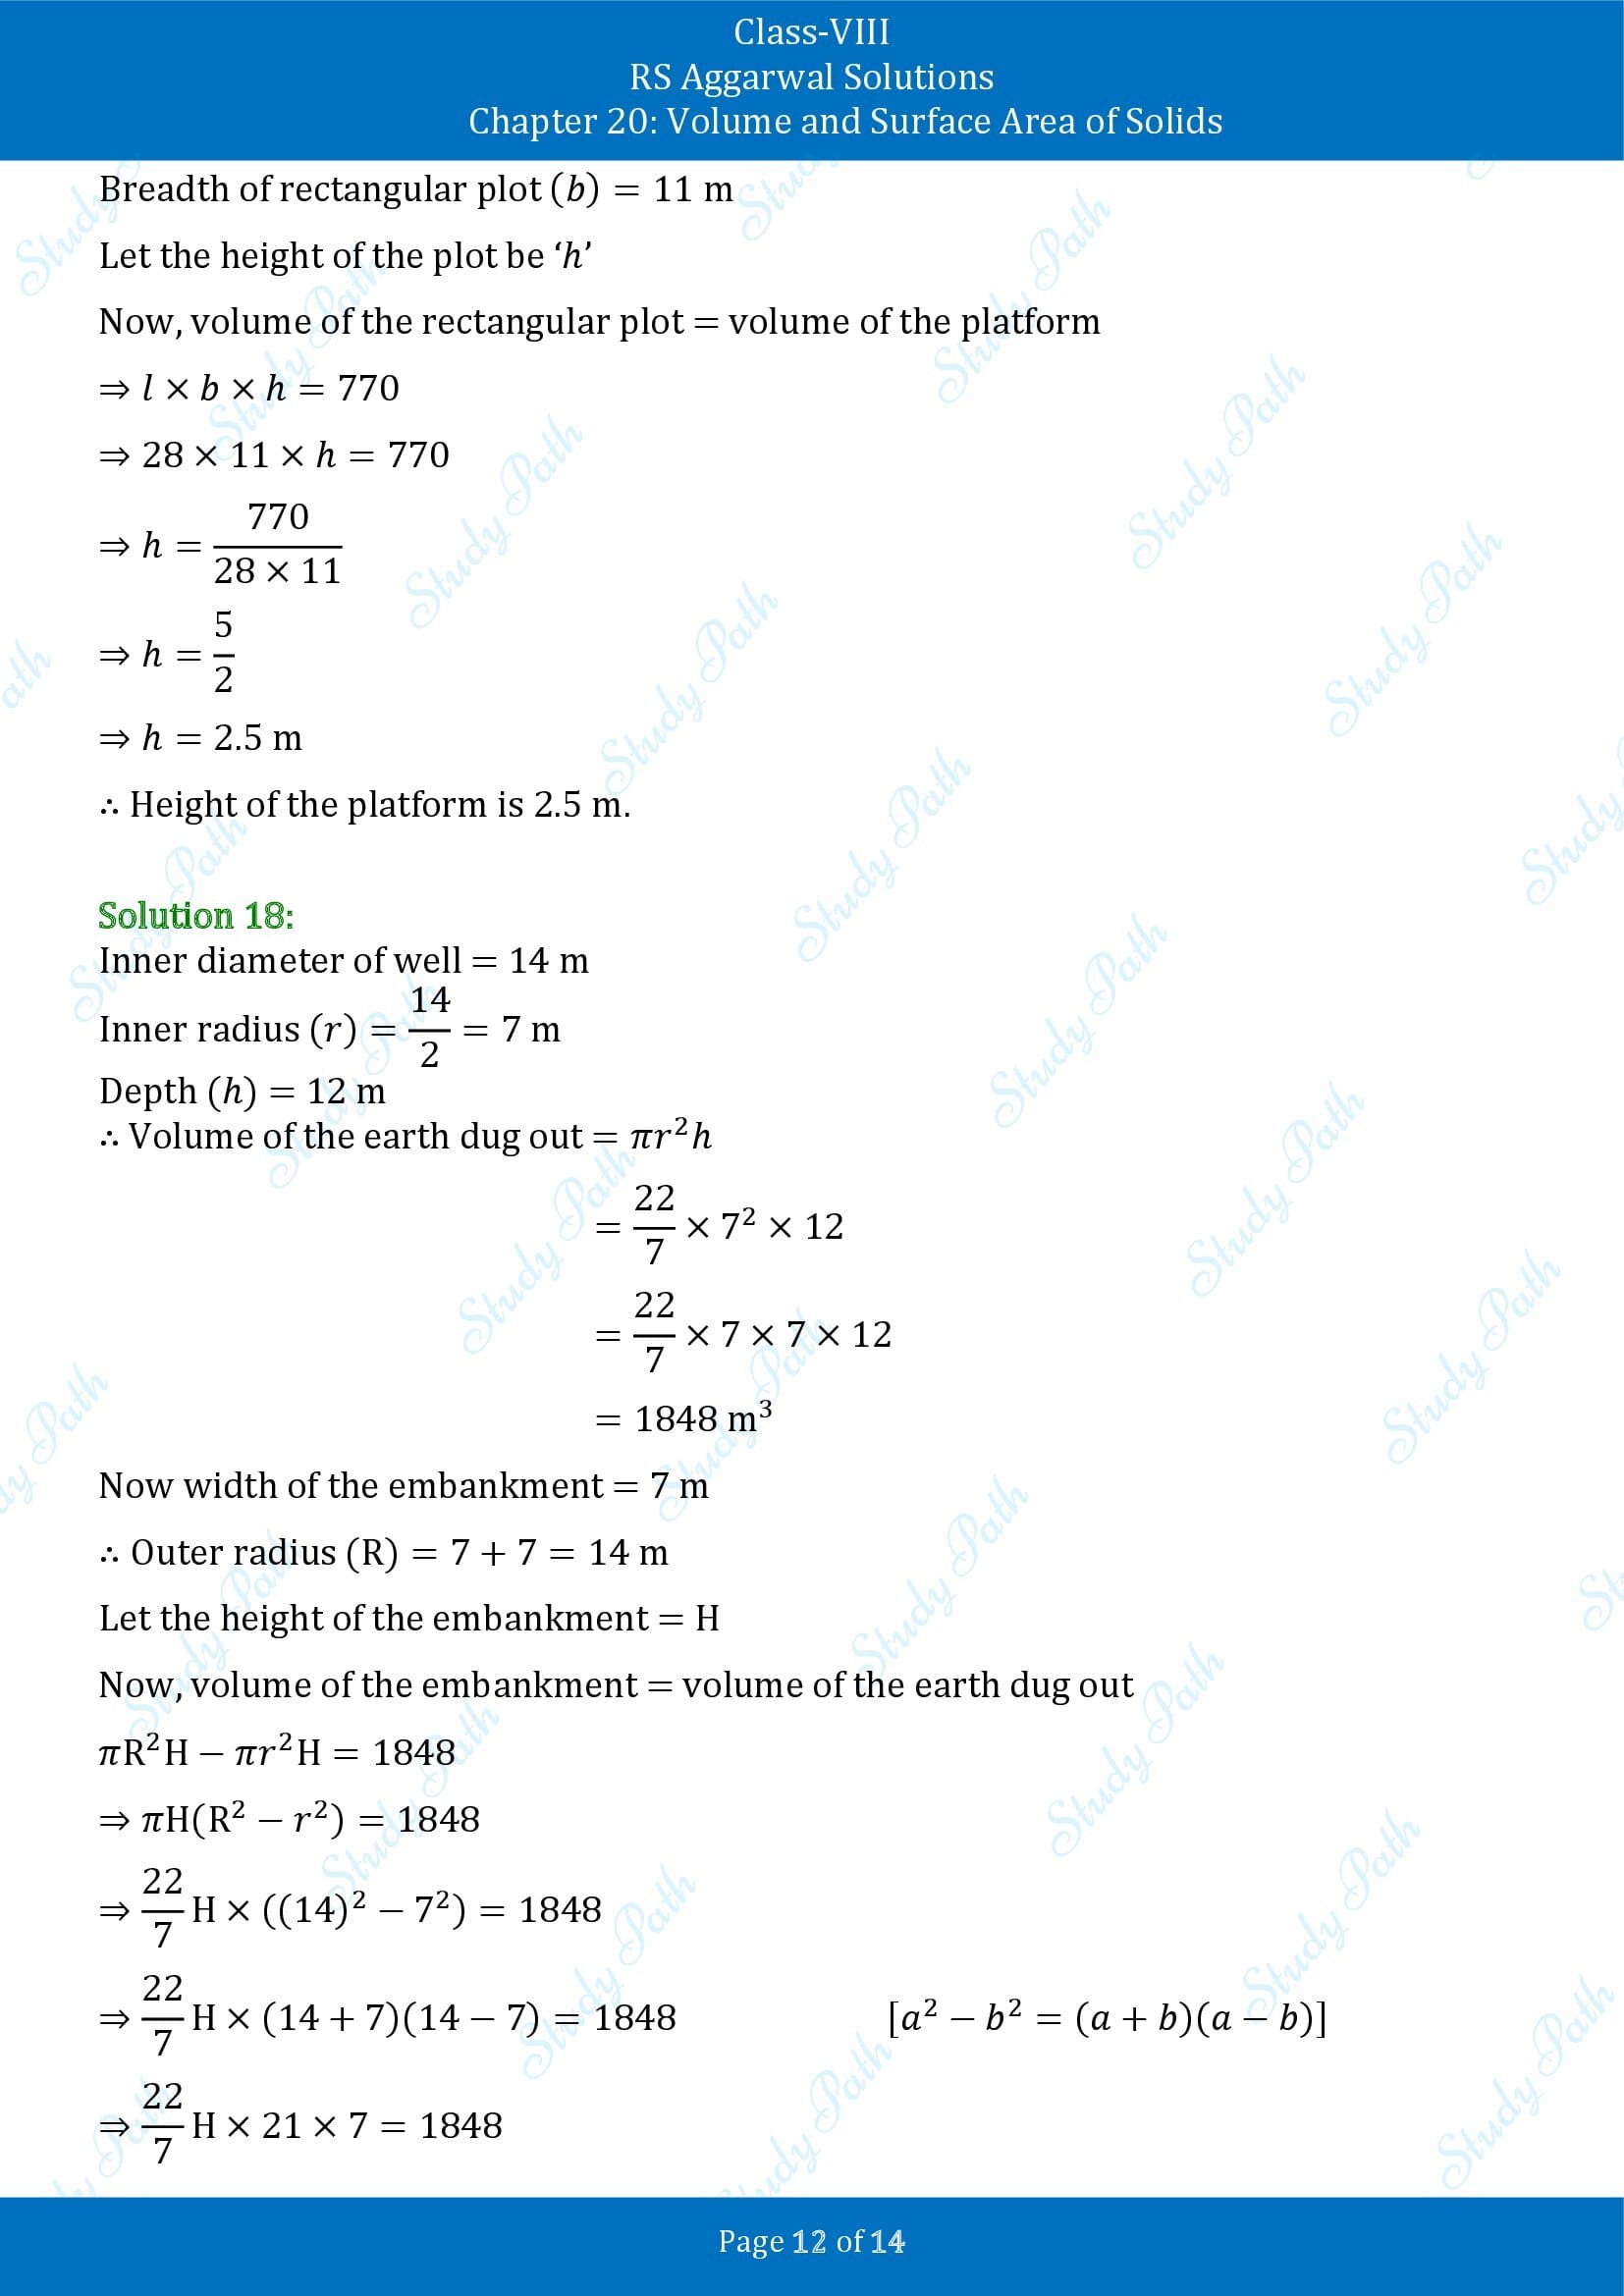 RS Aggarwal Solutions Class 8 Chapter 20 Volume and Surface Area of Solids Exercise 20B 00012